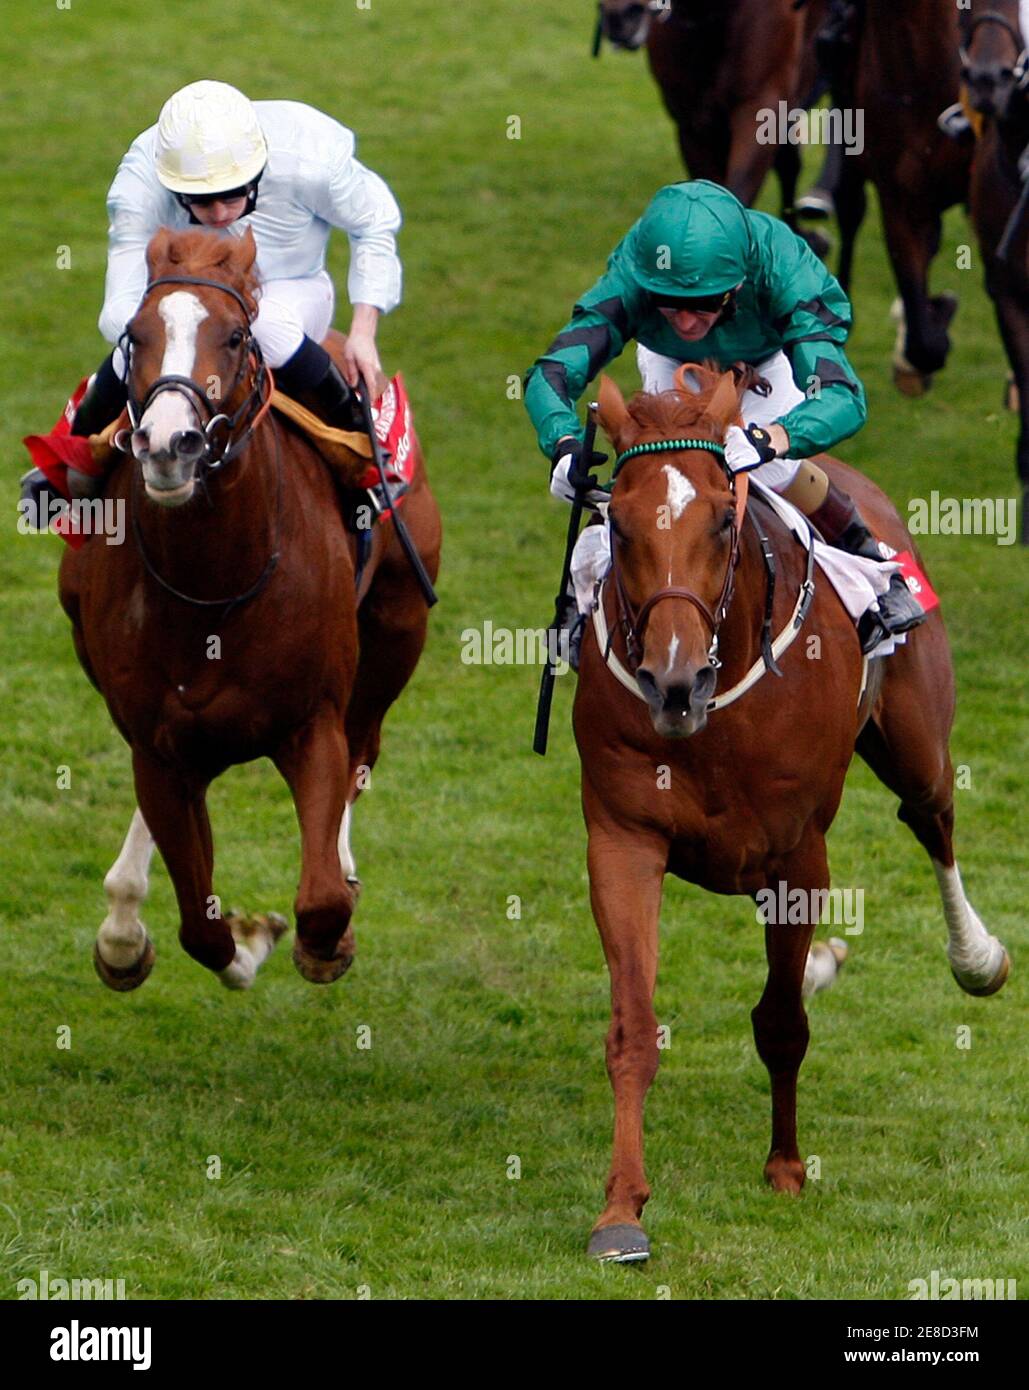 Kevin Manning riding New Approach (R) wins the Derby ahead of Ryan Moore on Tartan Bearer during the Epsom Derby Festival at Epsom Downs in Surrey, southern England, June 7, 2008.    REUTERS/Darren Staples   (BRITAIN) Stock Photo